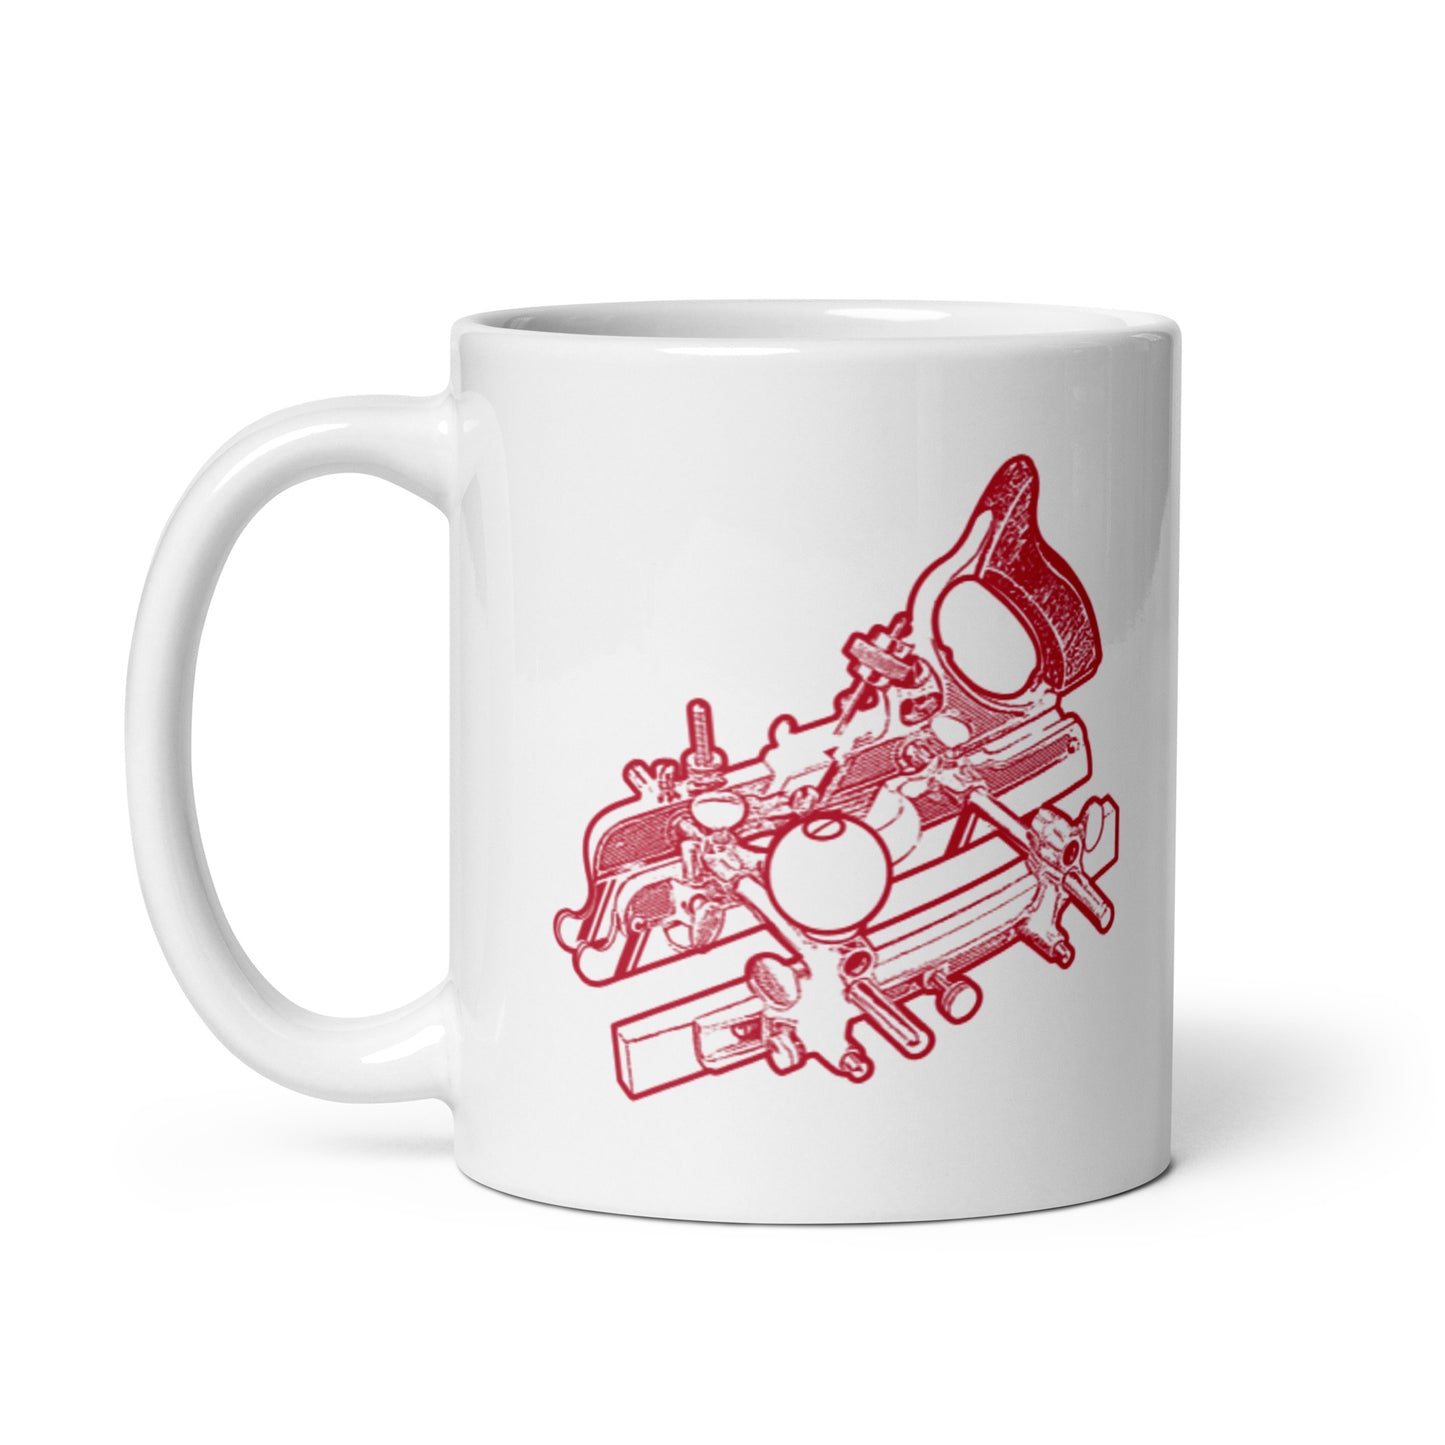 Stanley 45 Combination Plane Woodworking Gift Mug (Red)